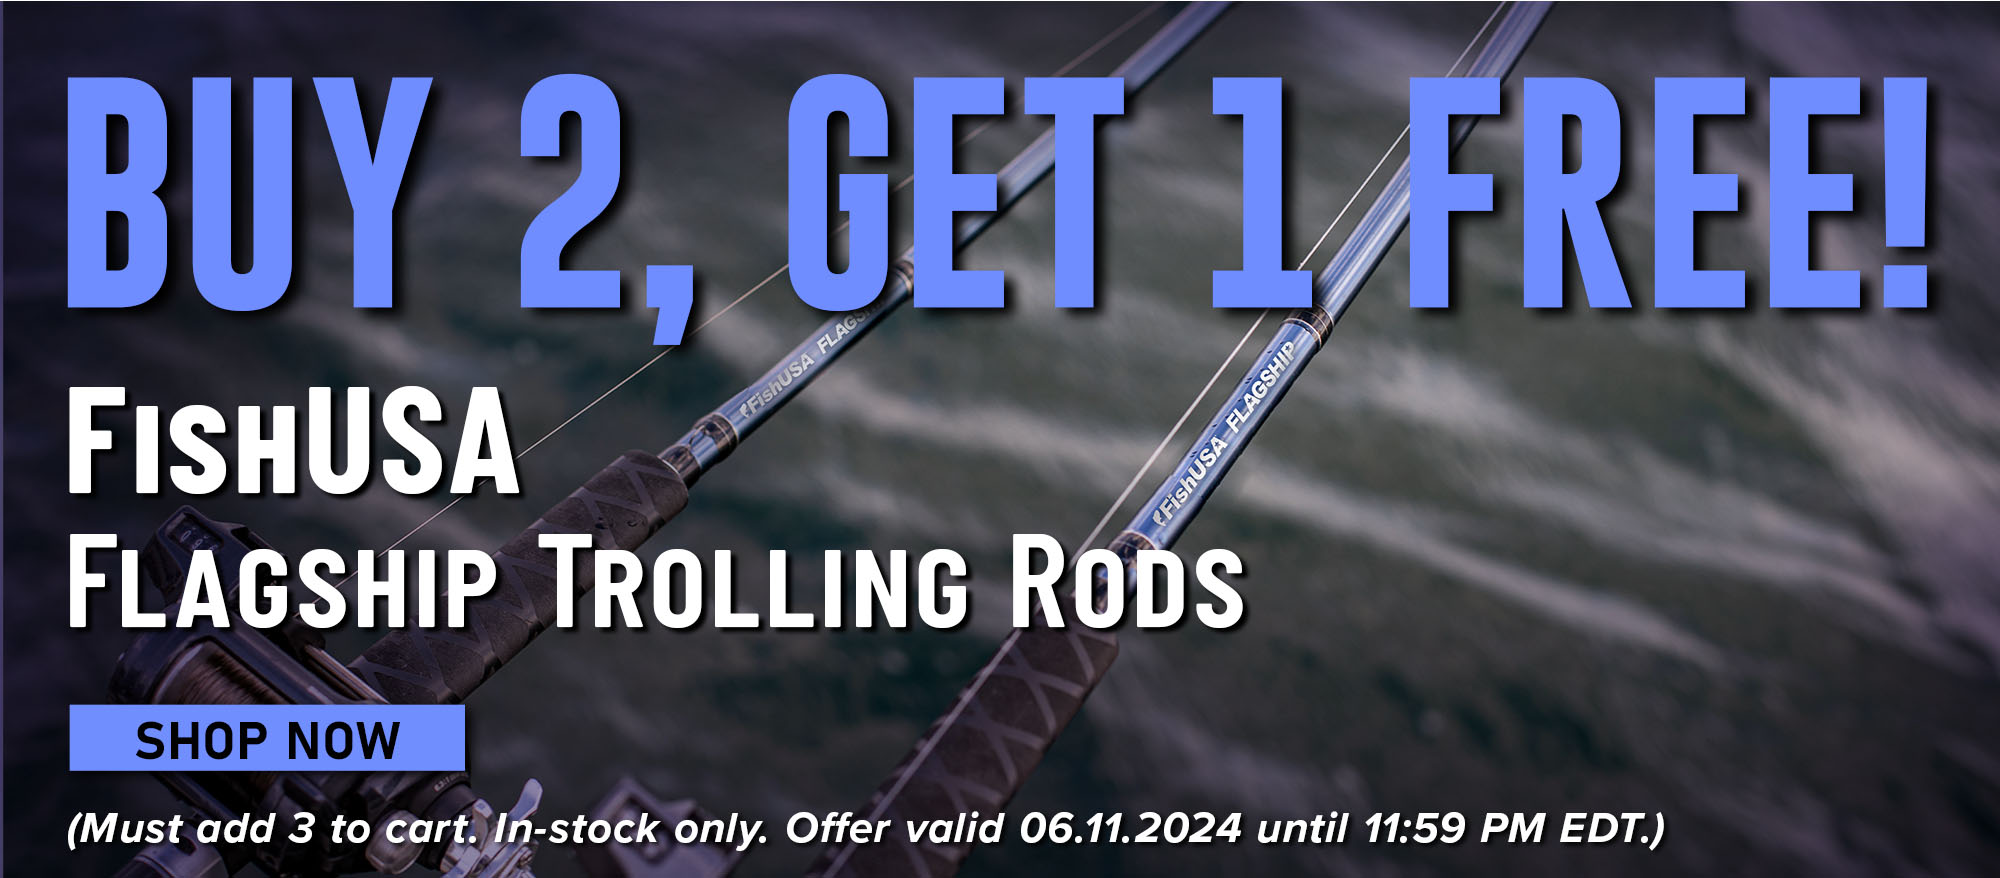 Buy 2, Get 1 Free! FishUSA Flagship Trolling Rods Shop Now (Must add 3 to cart. In-stock only. Offer valid 06.11.2024 until 11:59 PM EDT.)